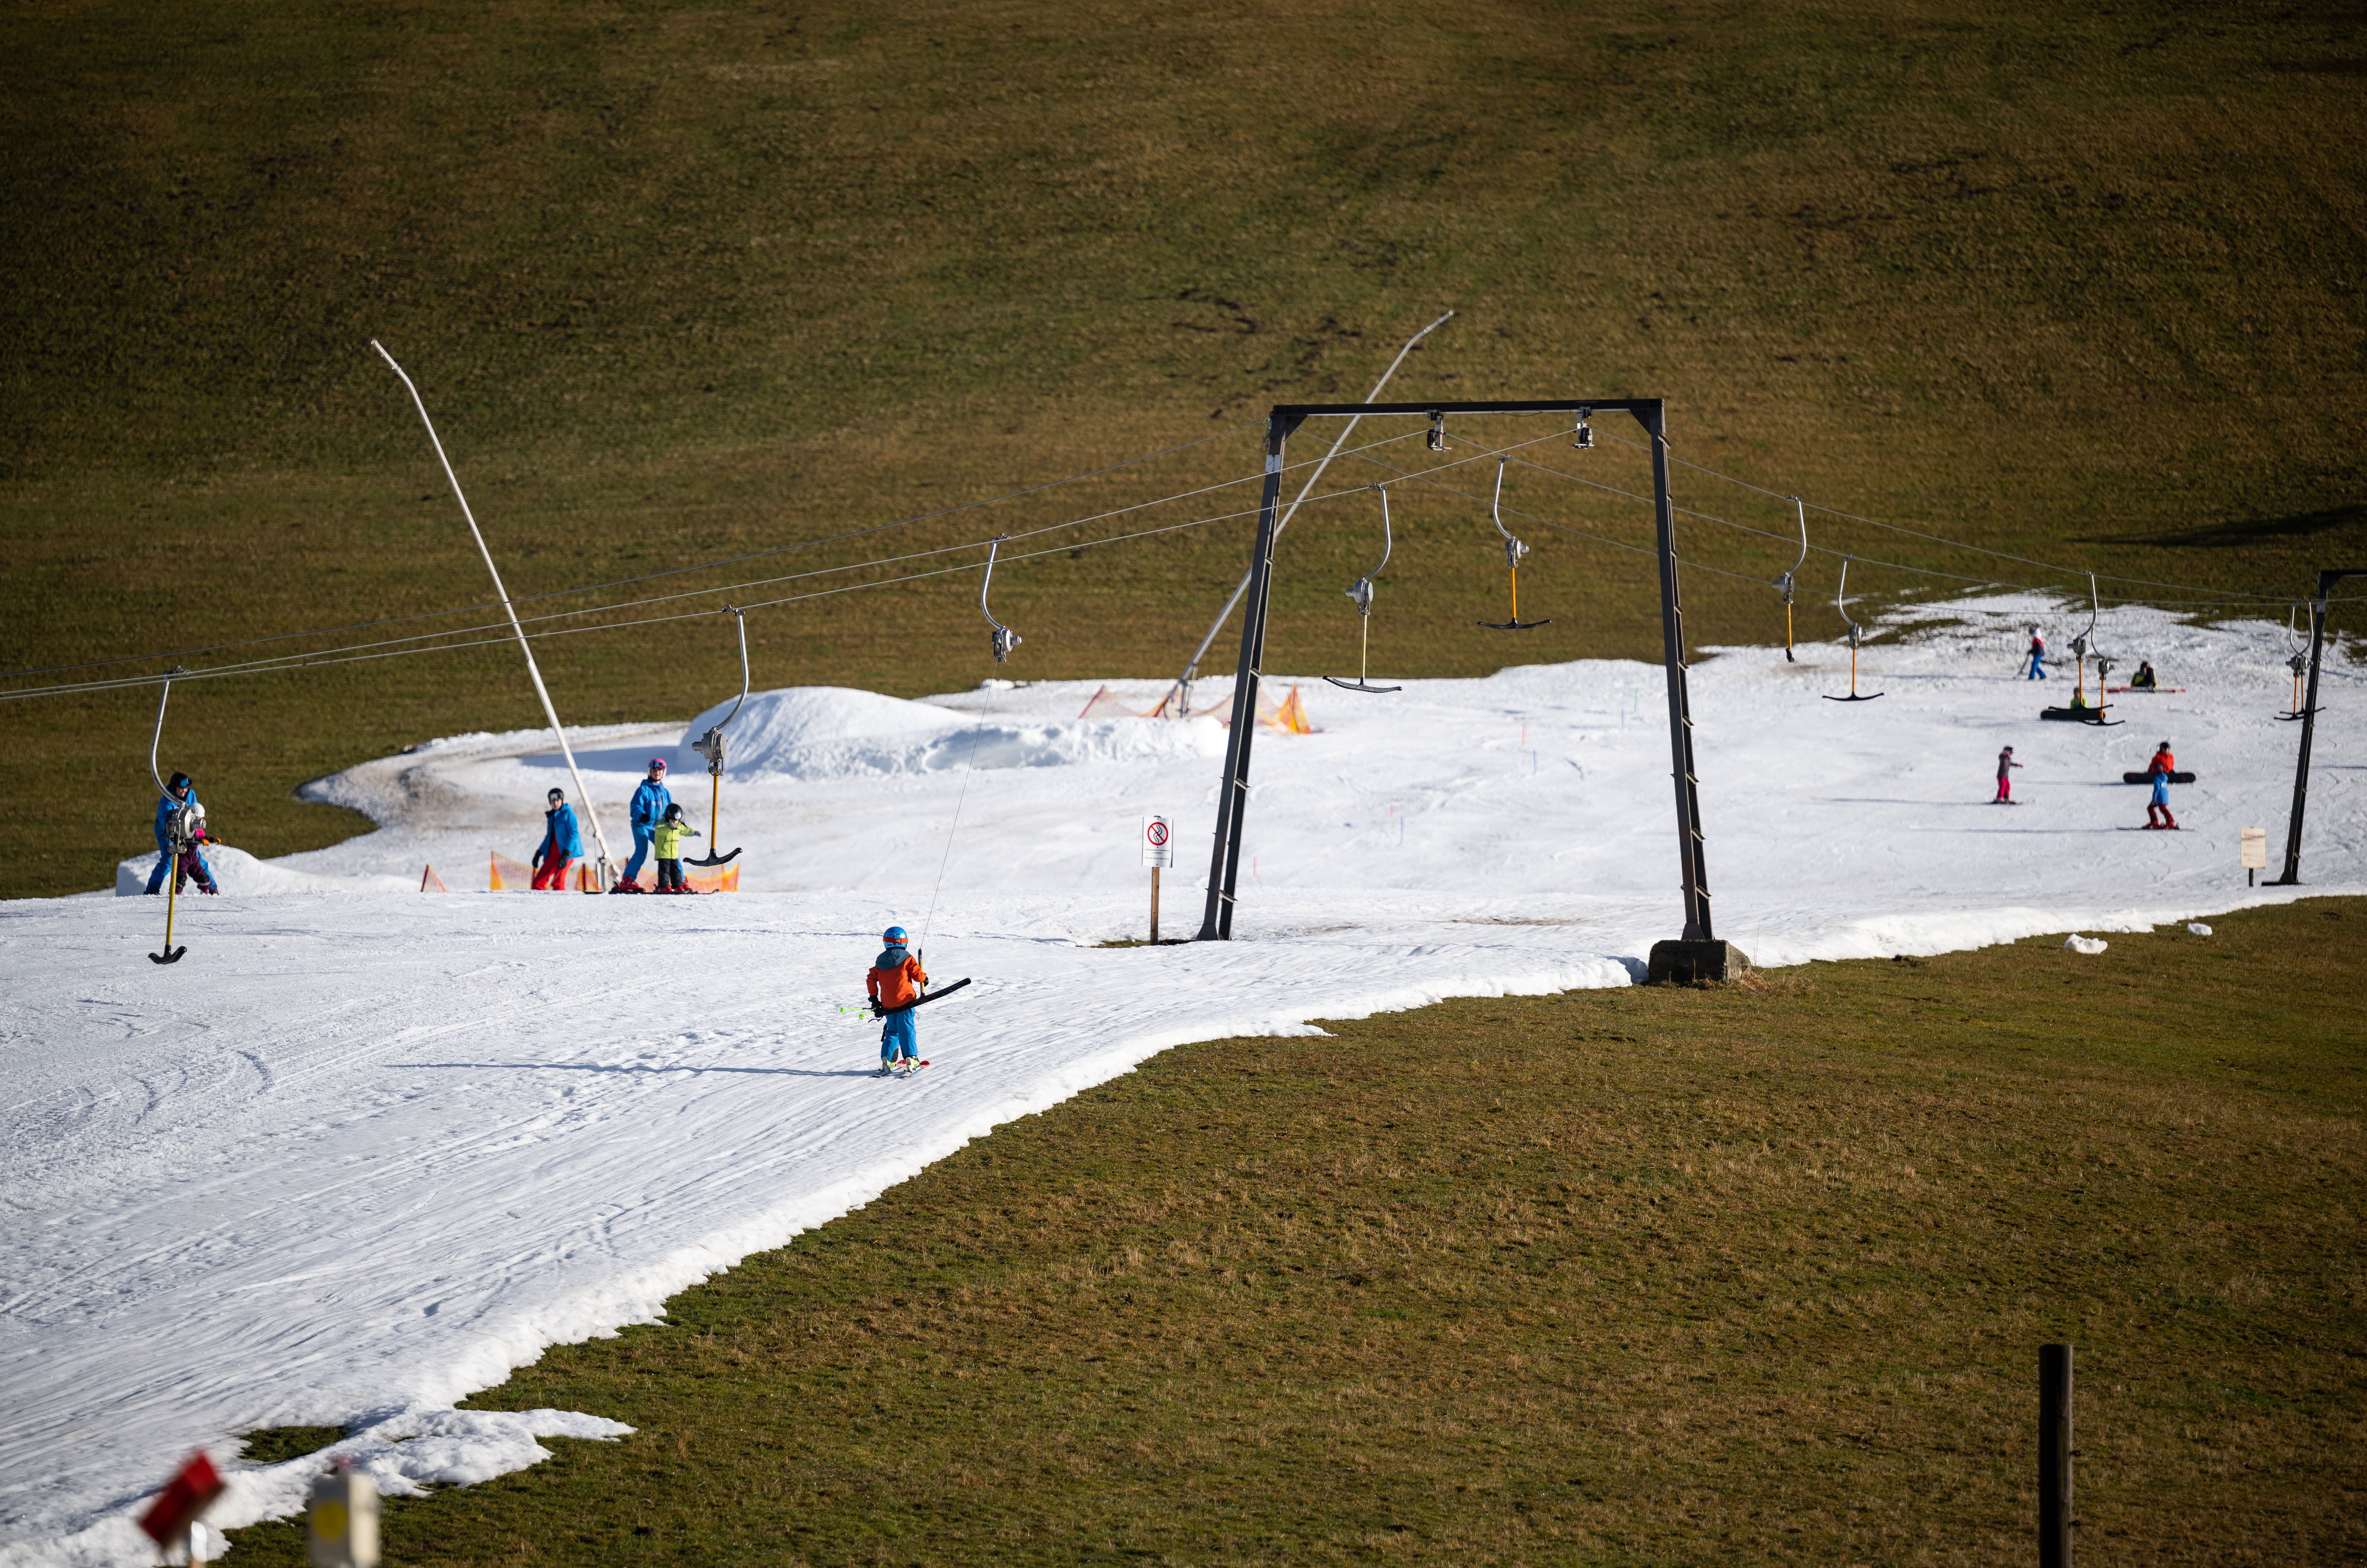 Skiiers on a slope covered in artificial snow in Filzmoos, Austria. (Photo: Daniel Kopatsch, Getty Images)